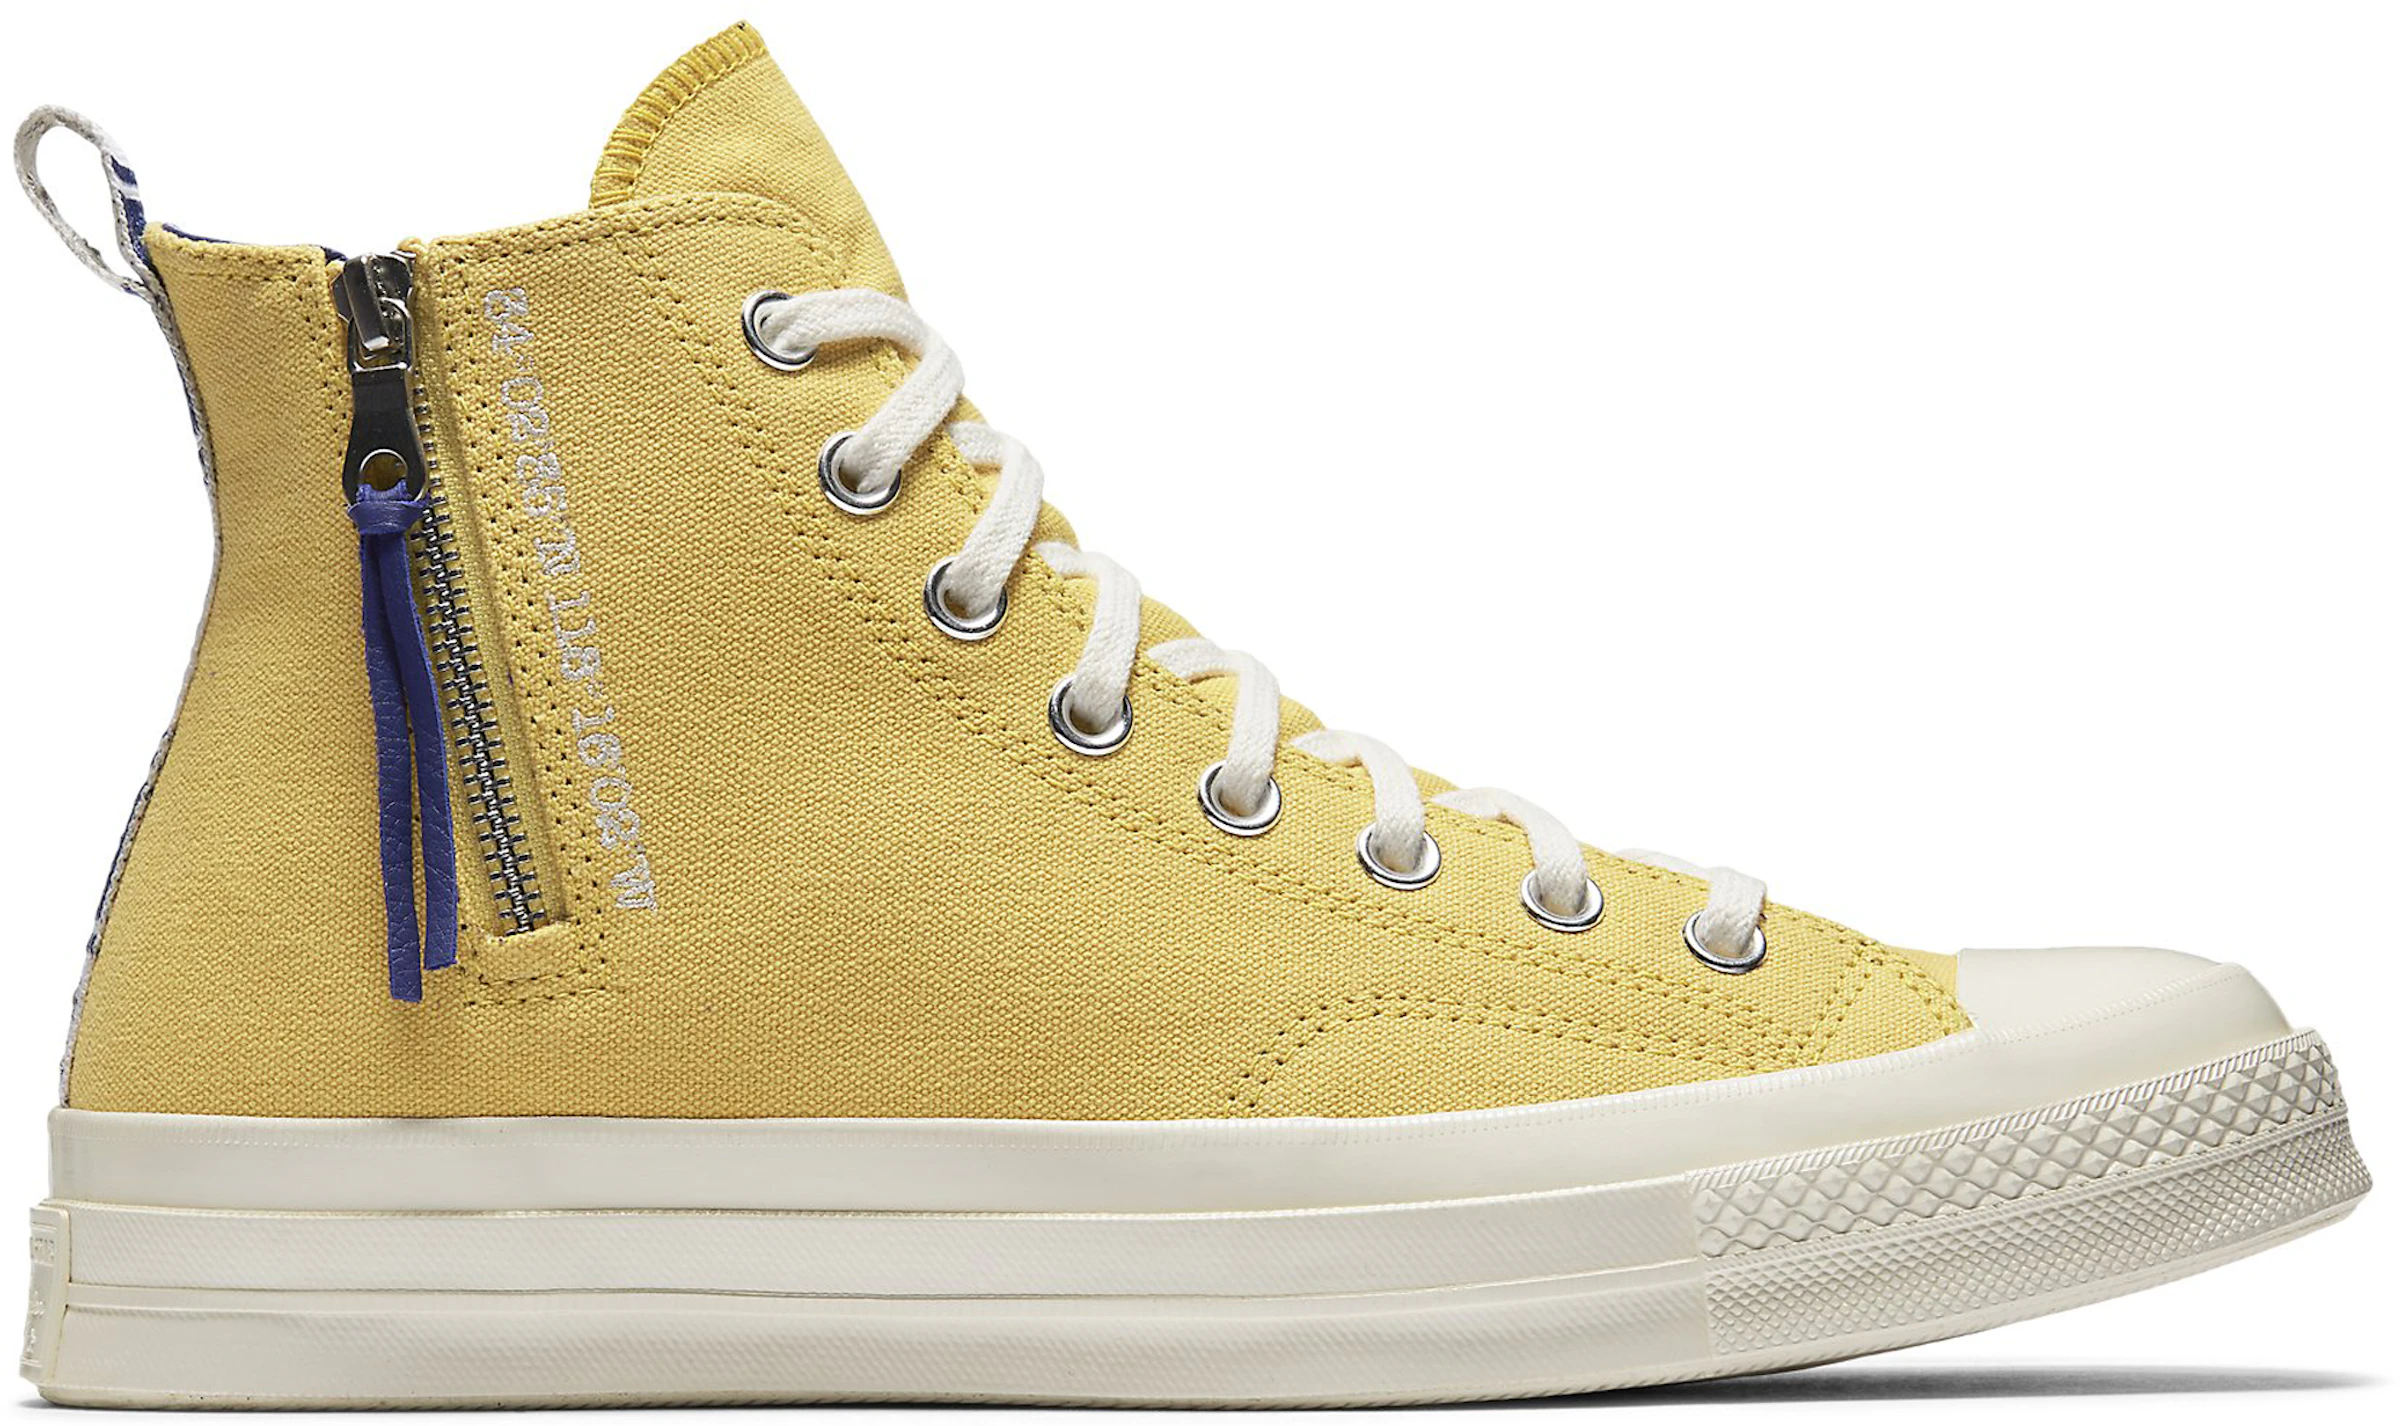 Chuck Taylor All-Star 70 Los Lakers Legends - 161156C - US